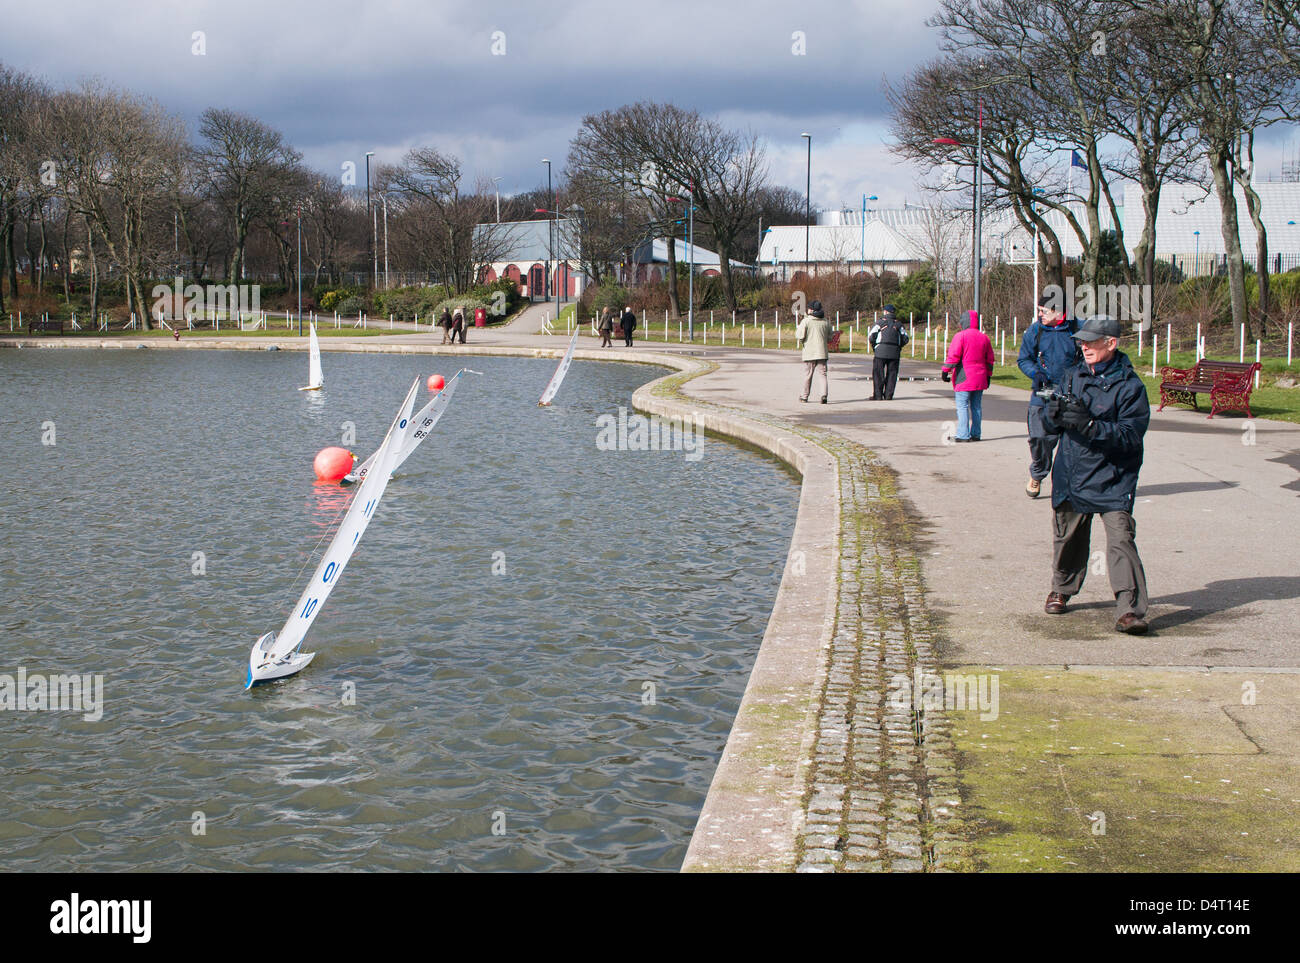 Enthusiasts sailing radio controlled model yachts in South Marine Park South Shields north east England UK Stock Photo